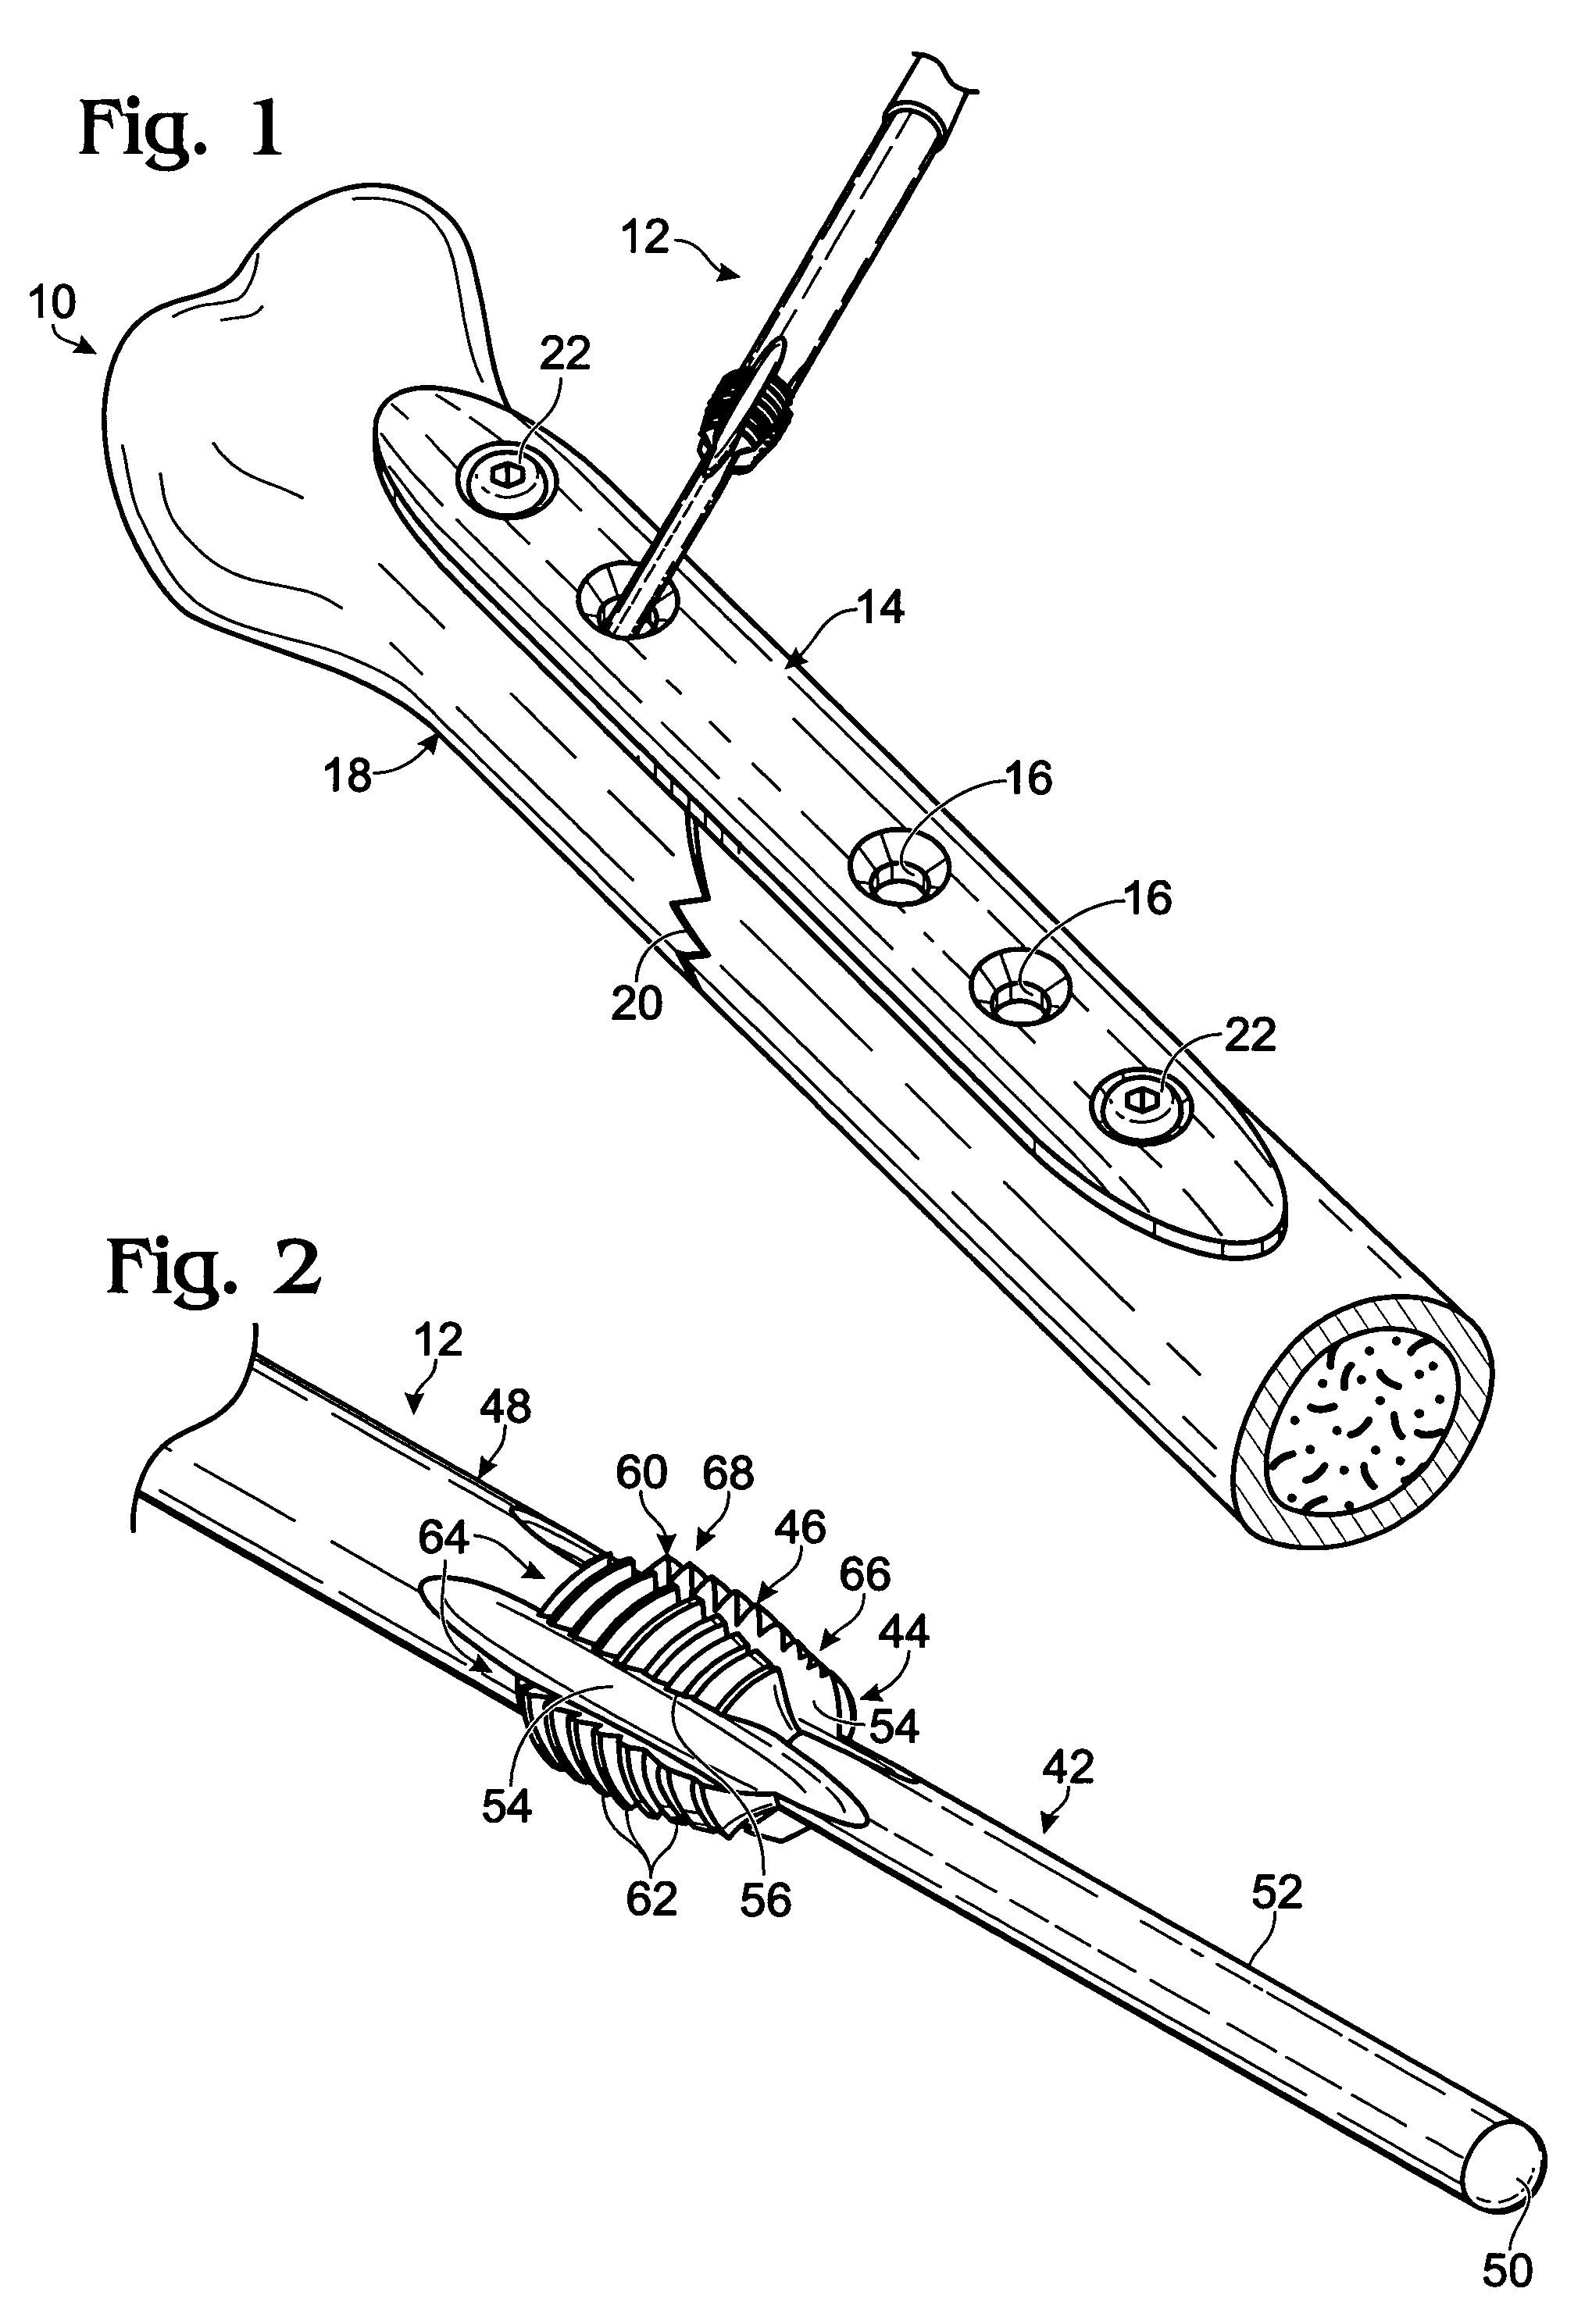 Bone plates with intraoperatively tapped apertures